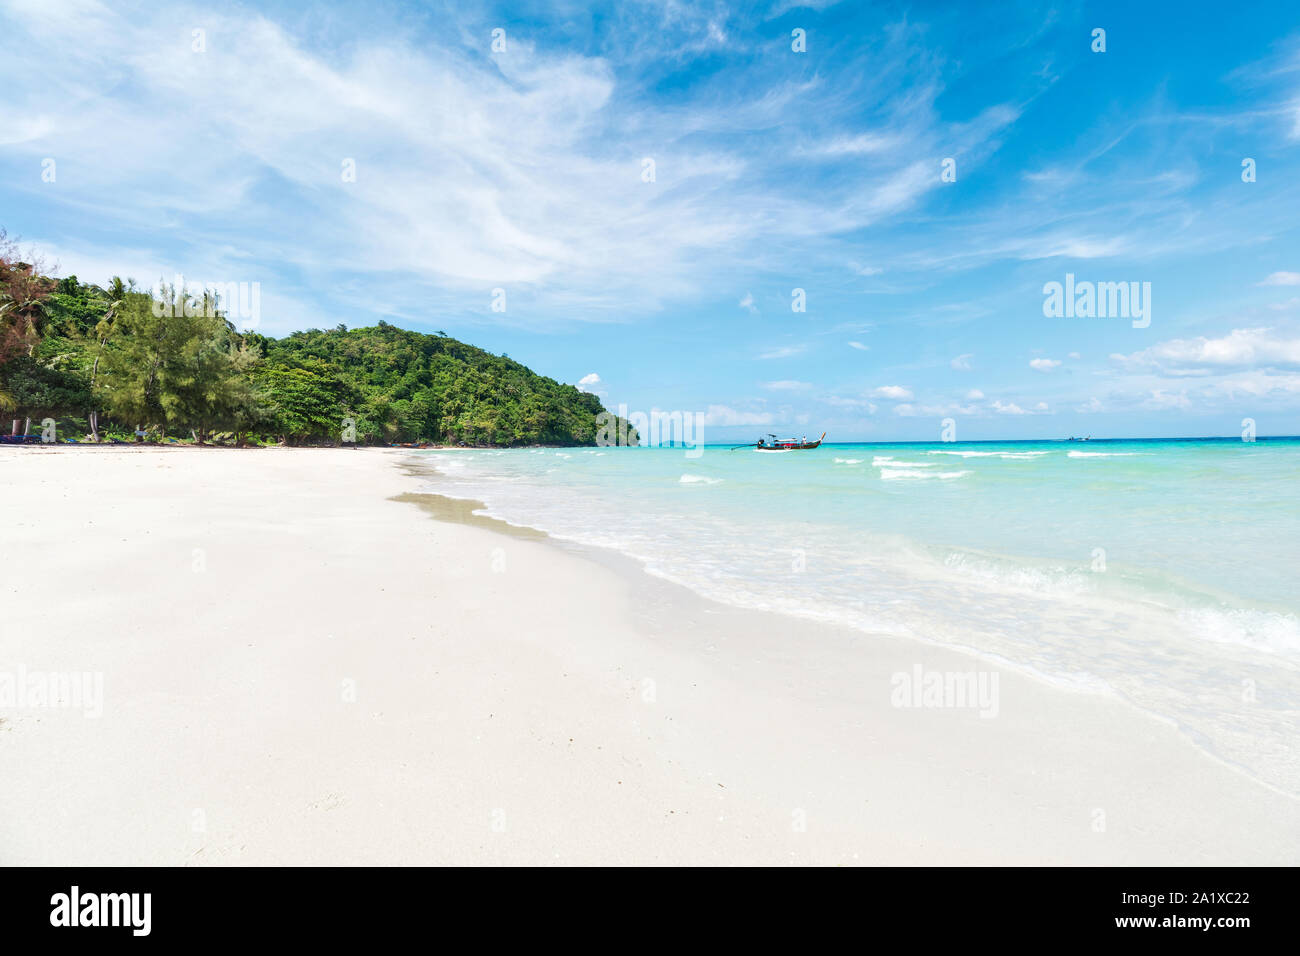 Asian tropical sandy beach paradise with tall palms in Thailand Stock Photo